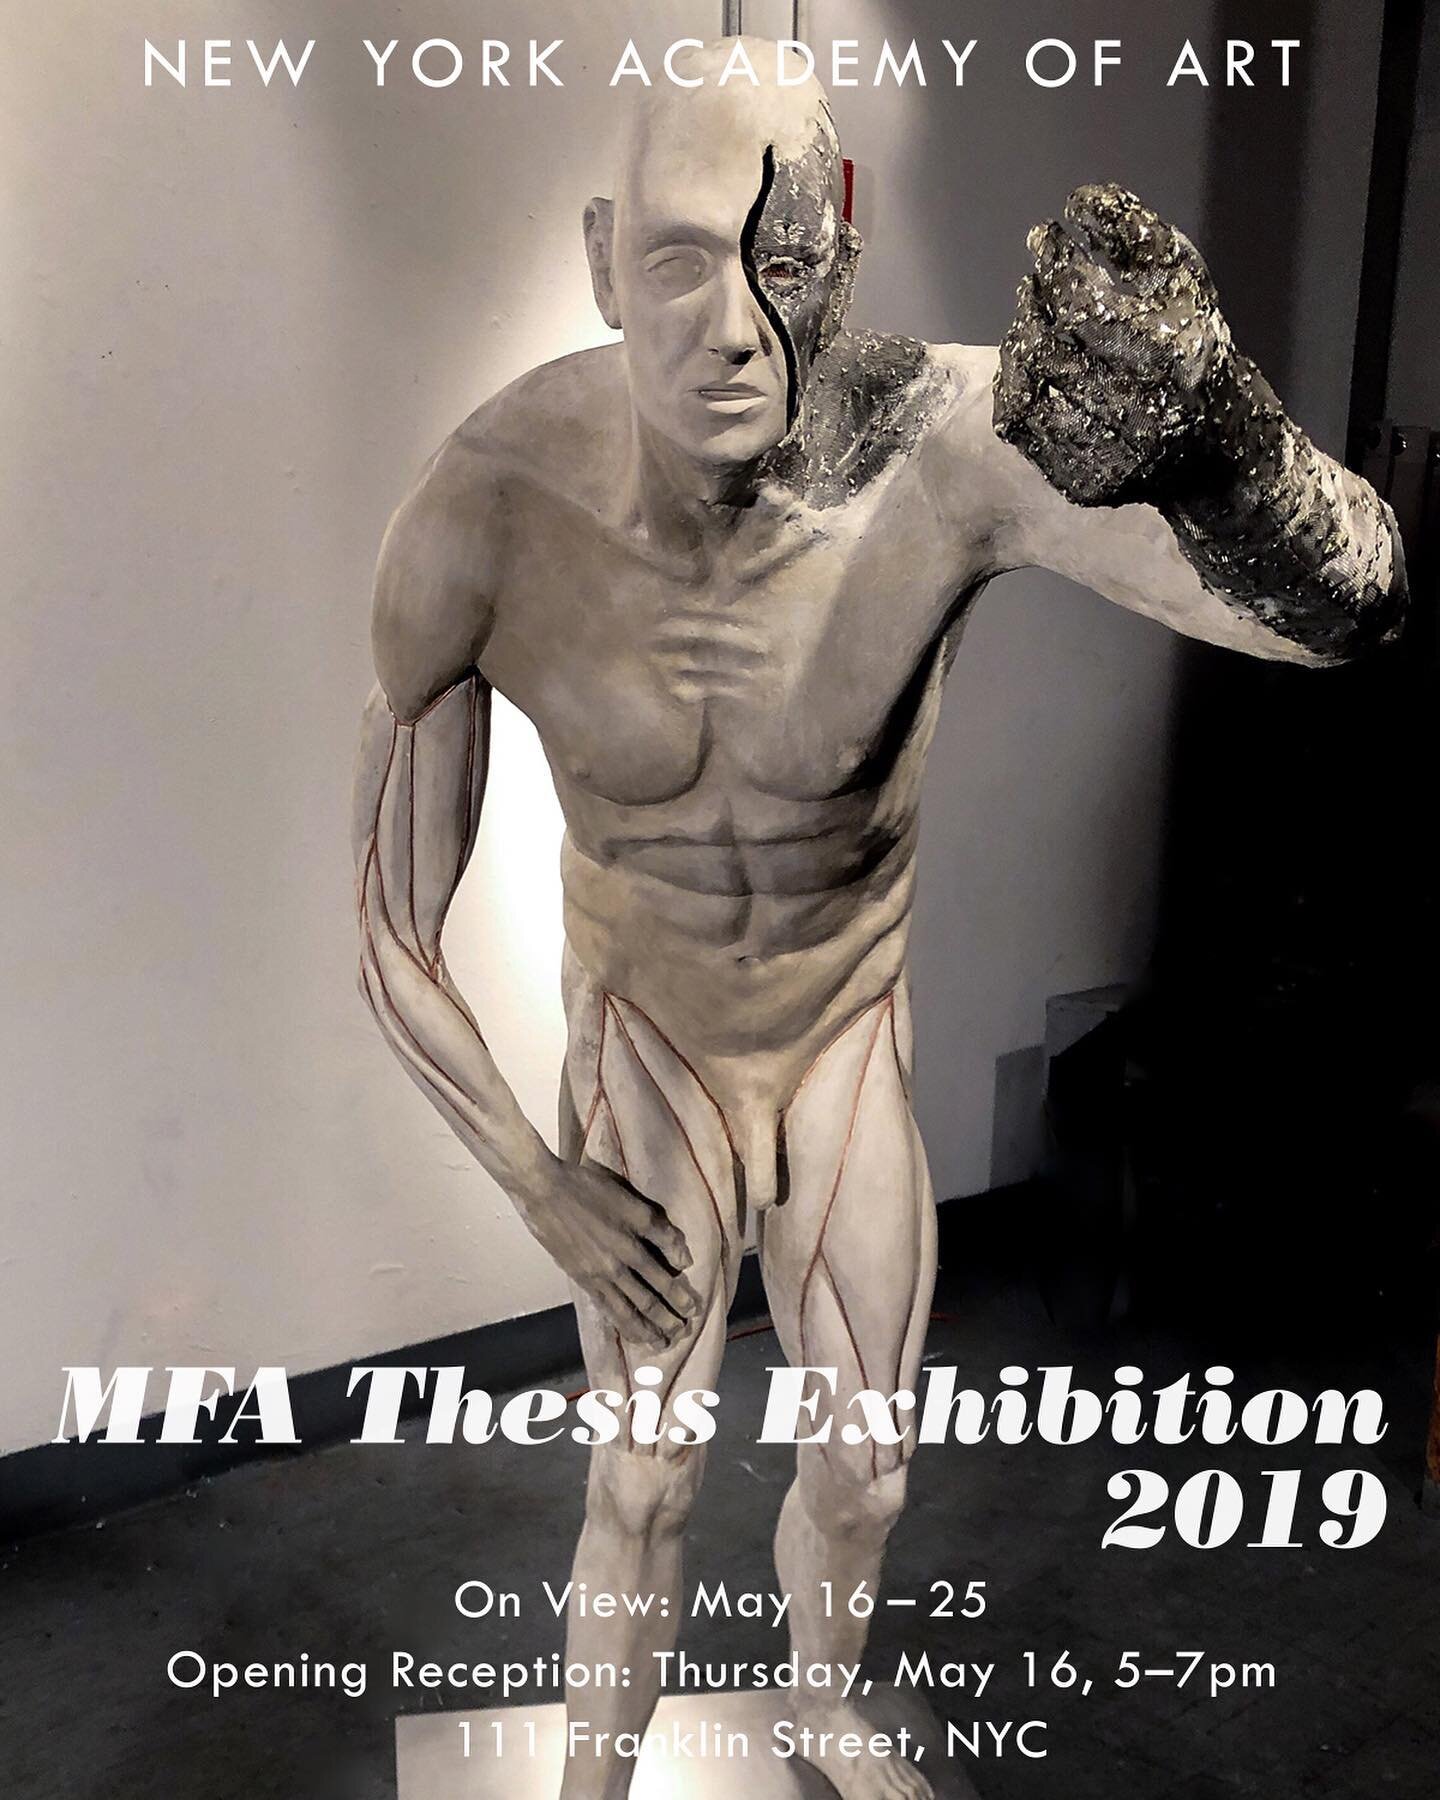 This Thursday is our MFA Thesis Exhibition at the New York Academy of Art, stop by if you can!